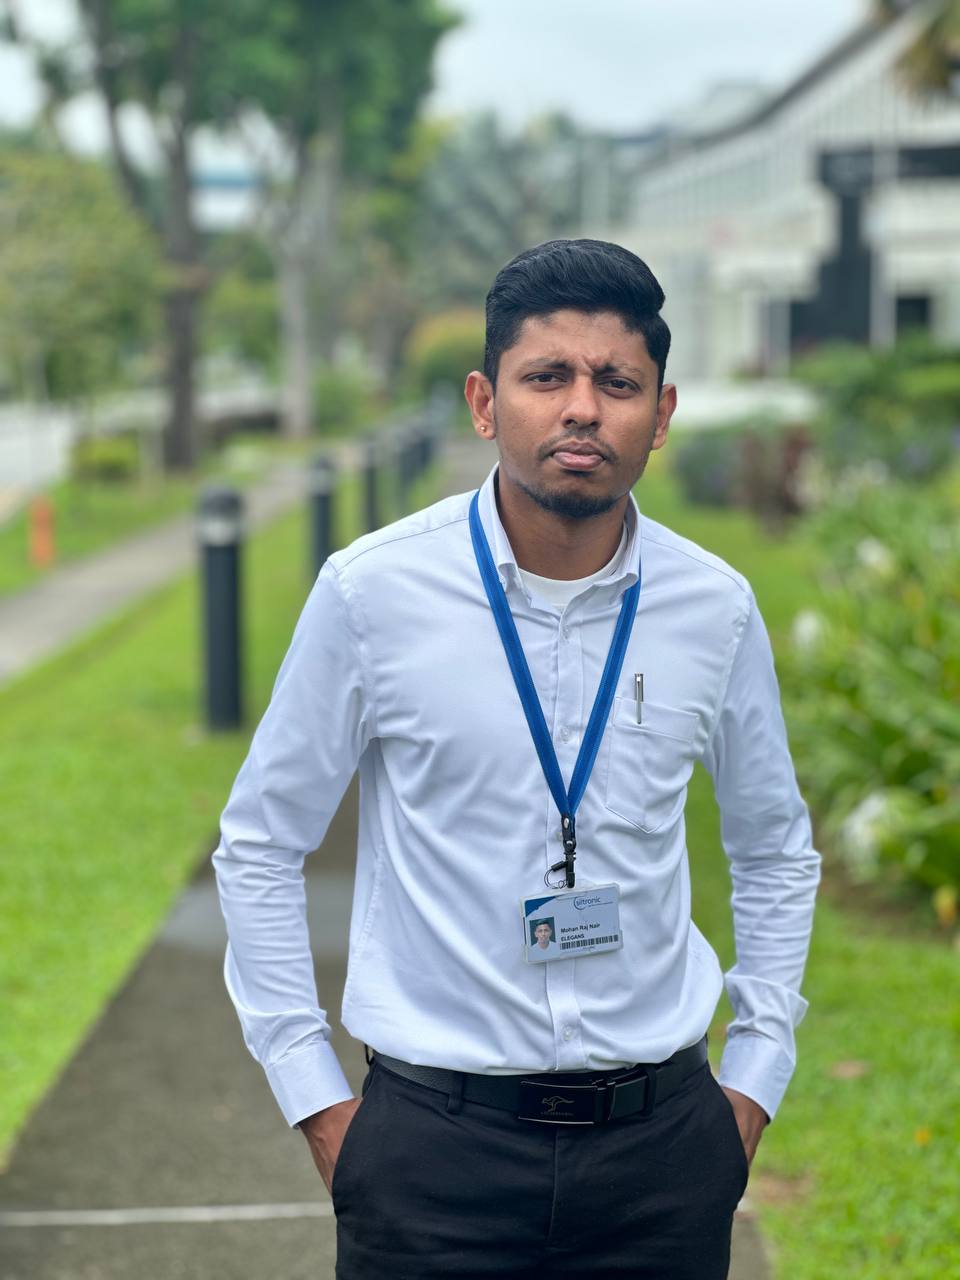 Mohan at singapore working as a security trainer